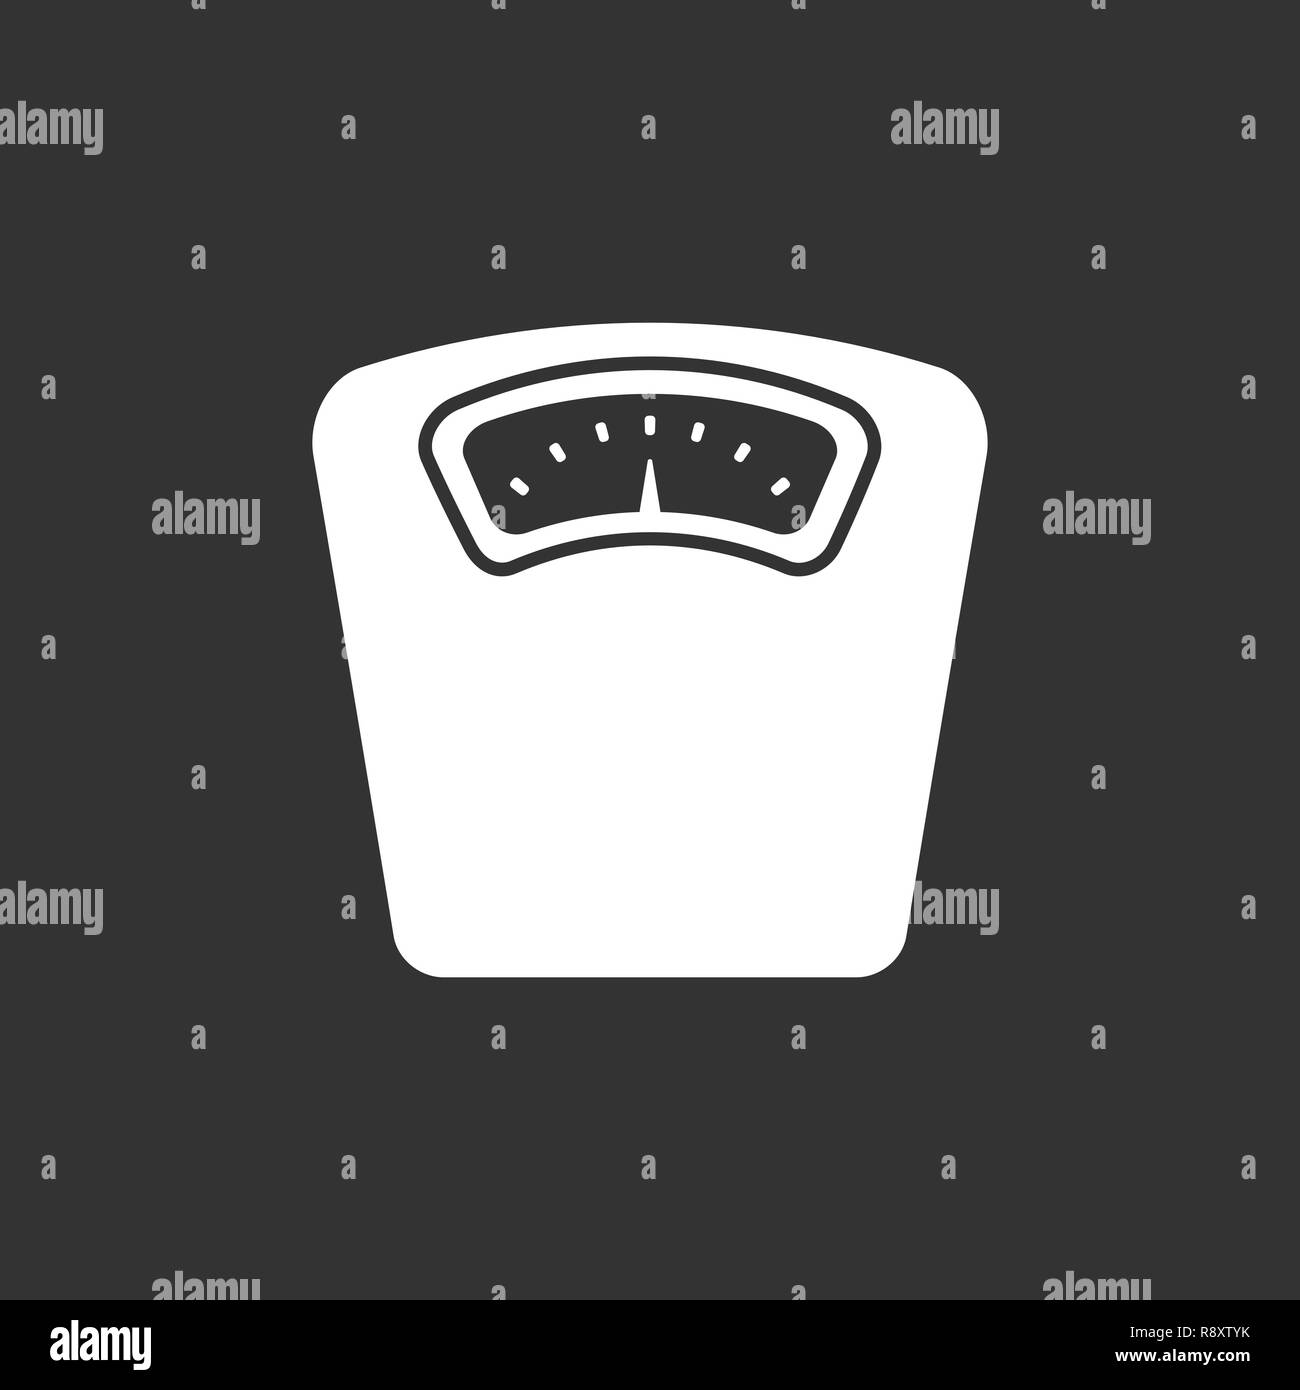 Bathroom scale icon on a black background. Vector Illustration Stock Vector